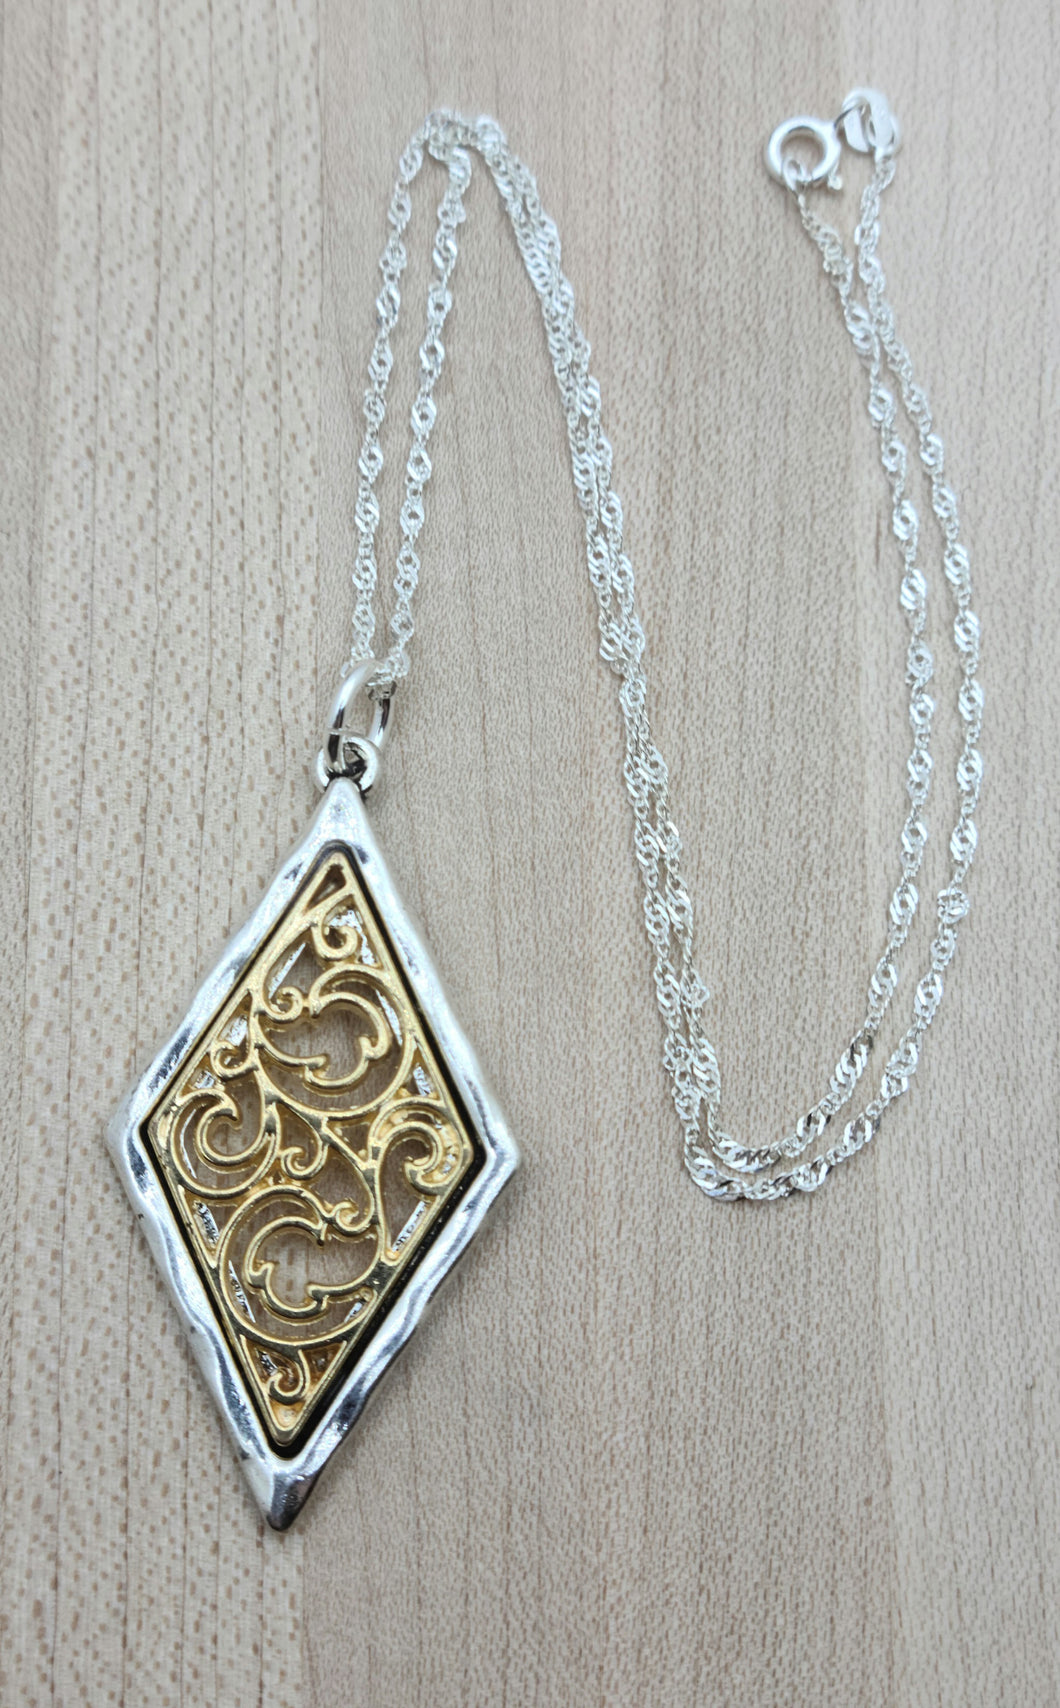 This gold filigree & silver bordered pewter diamond pendant is very striking!